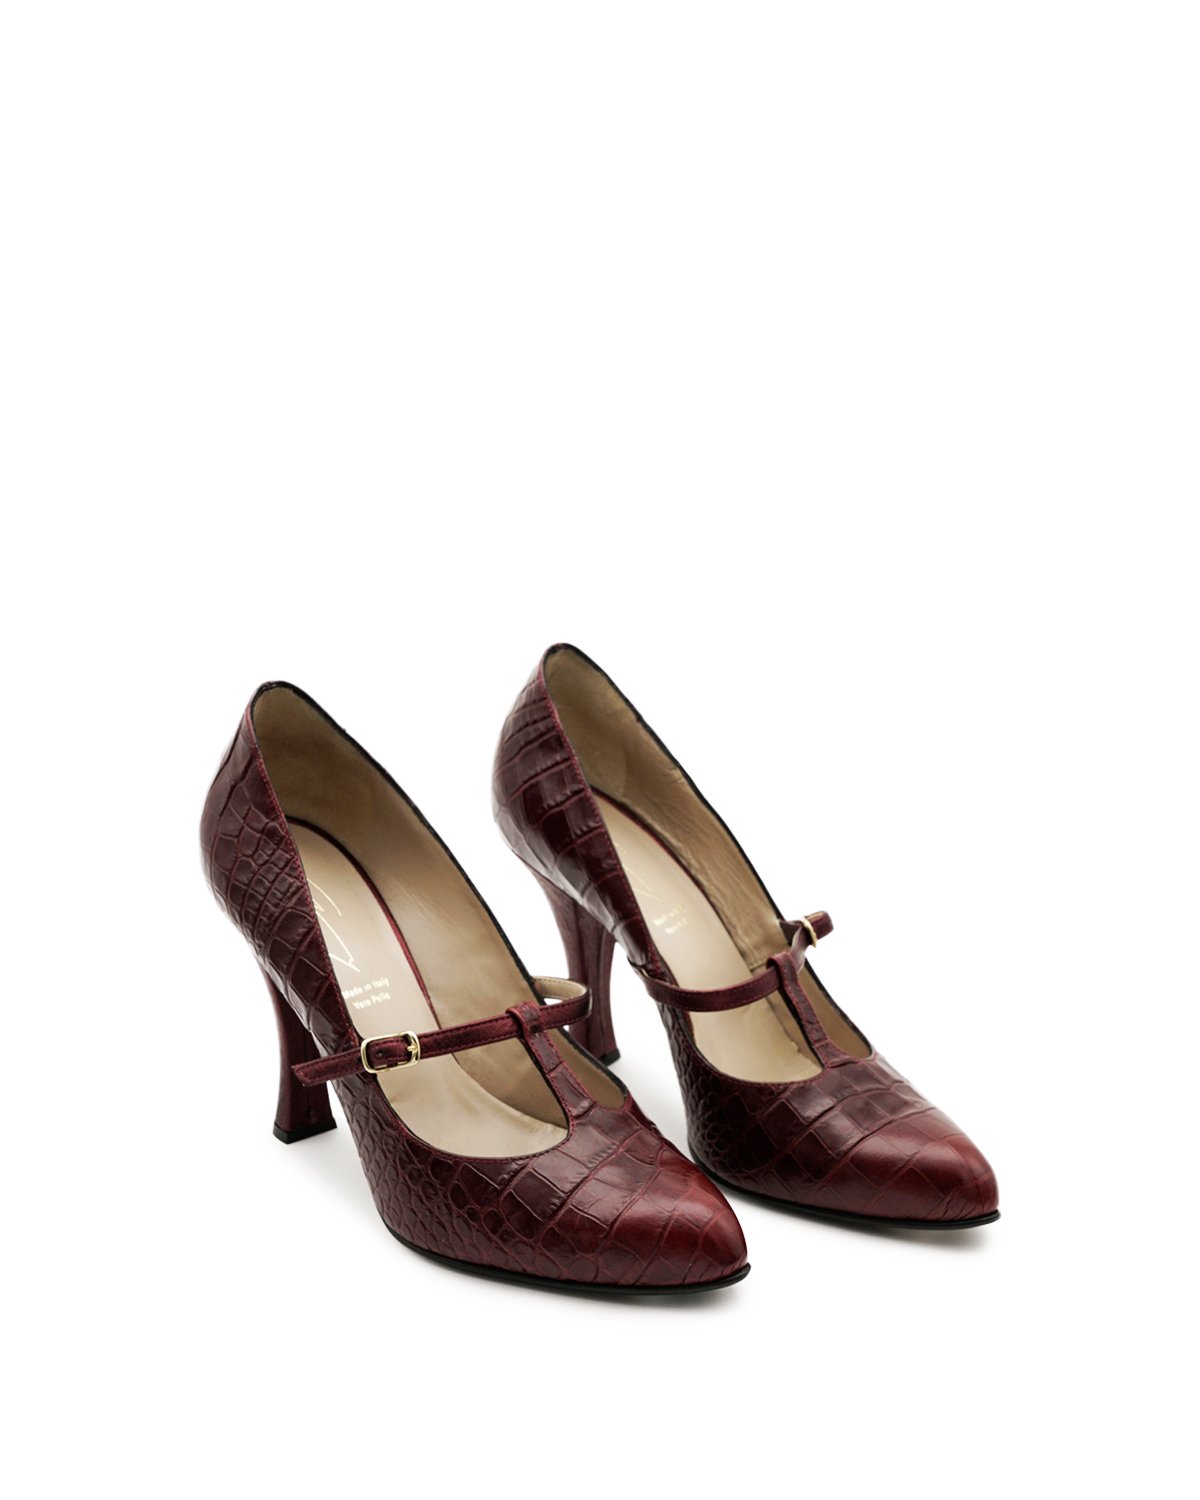 Burgundy pointed shoes with strap and spool heel | Temporary Flash Sale | Genny